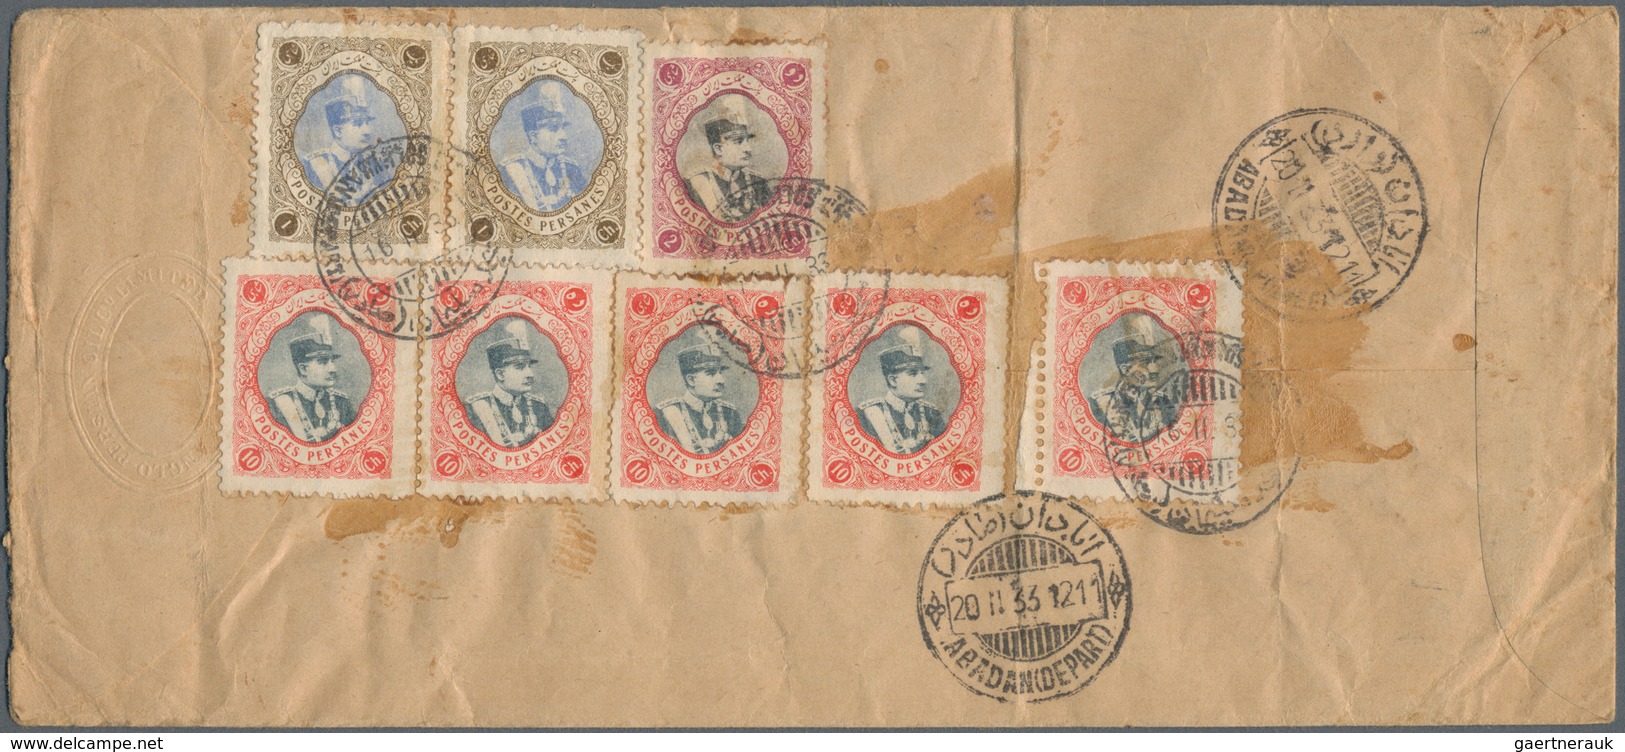 Iran: 1900-60 ca., 86 covers and 25 mint and used postal stationerys in album, first flights and air